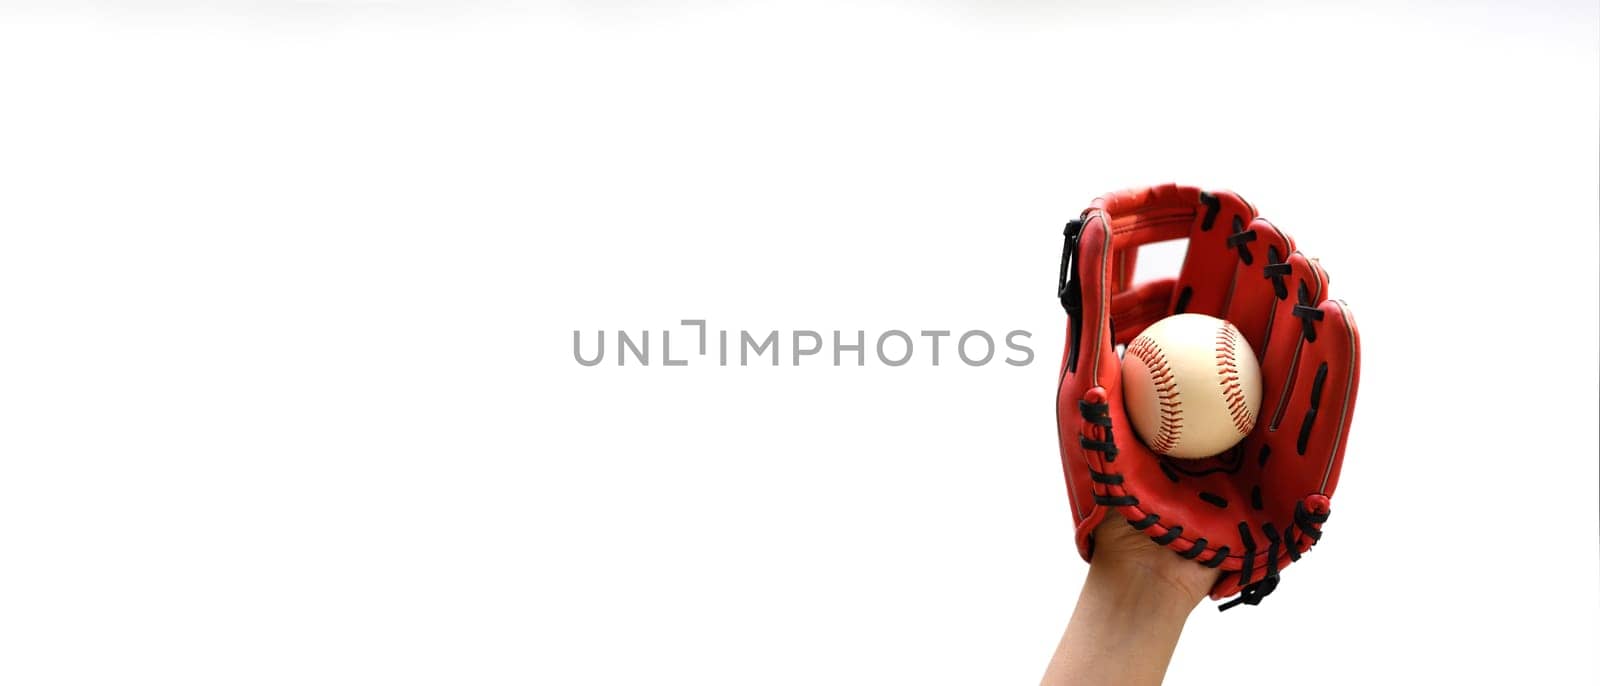 Hand with leather baseball glove and ball on white background. Fitness, sports and training concept.